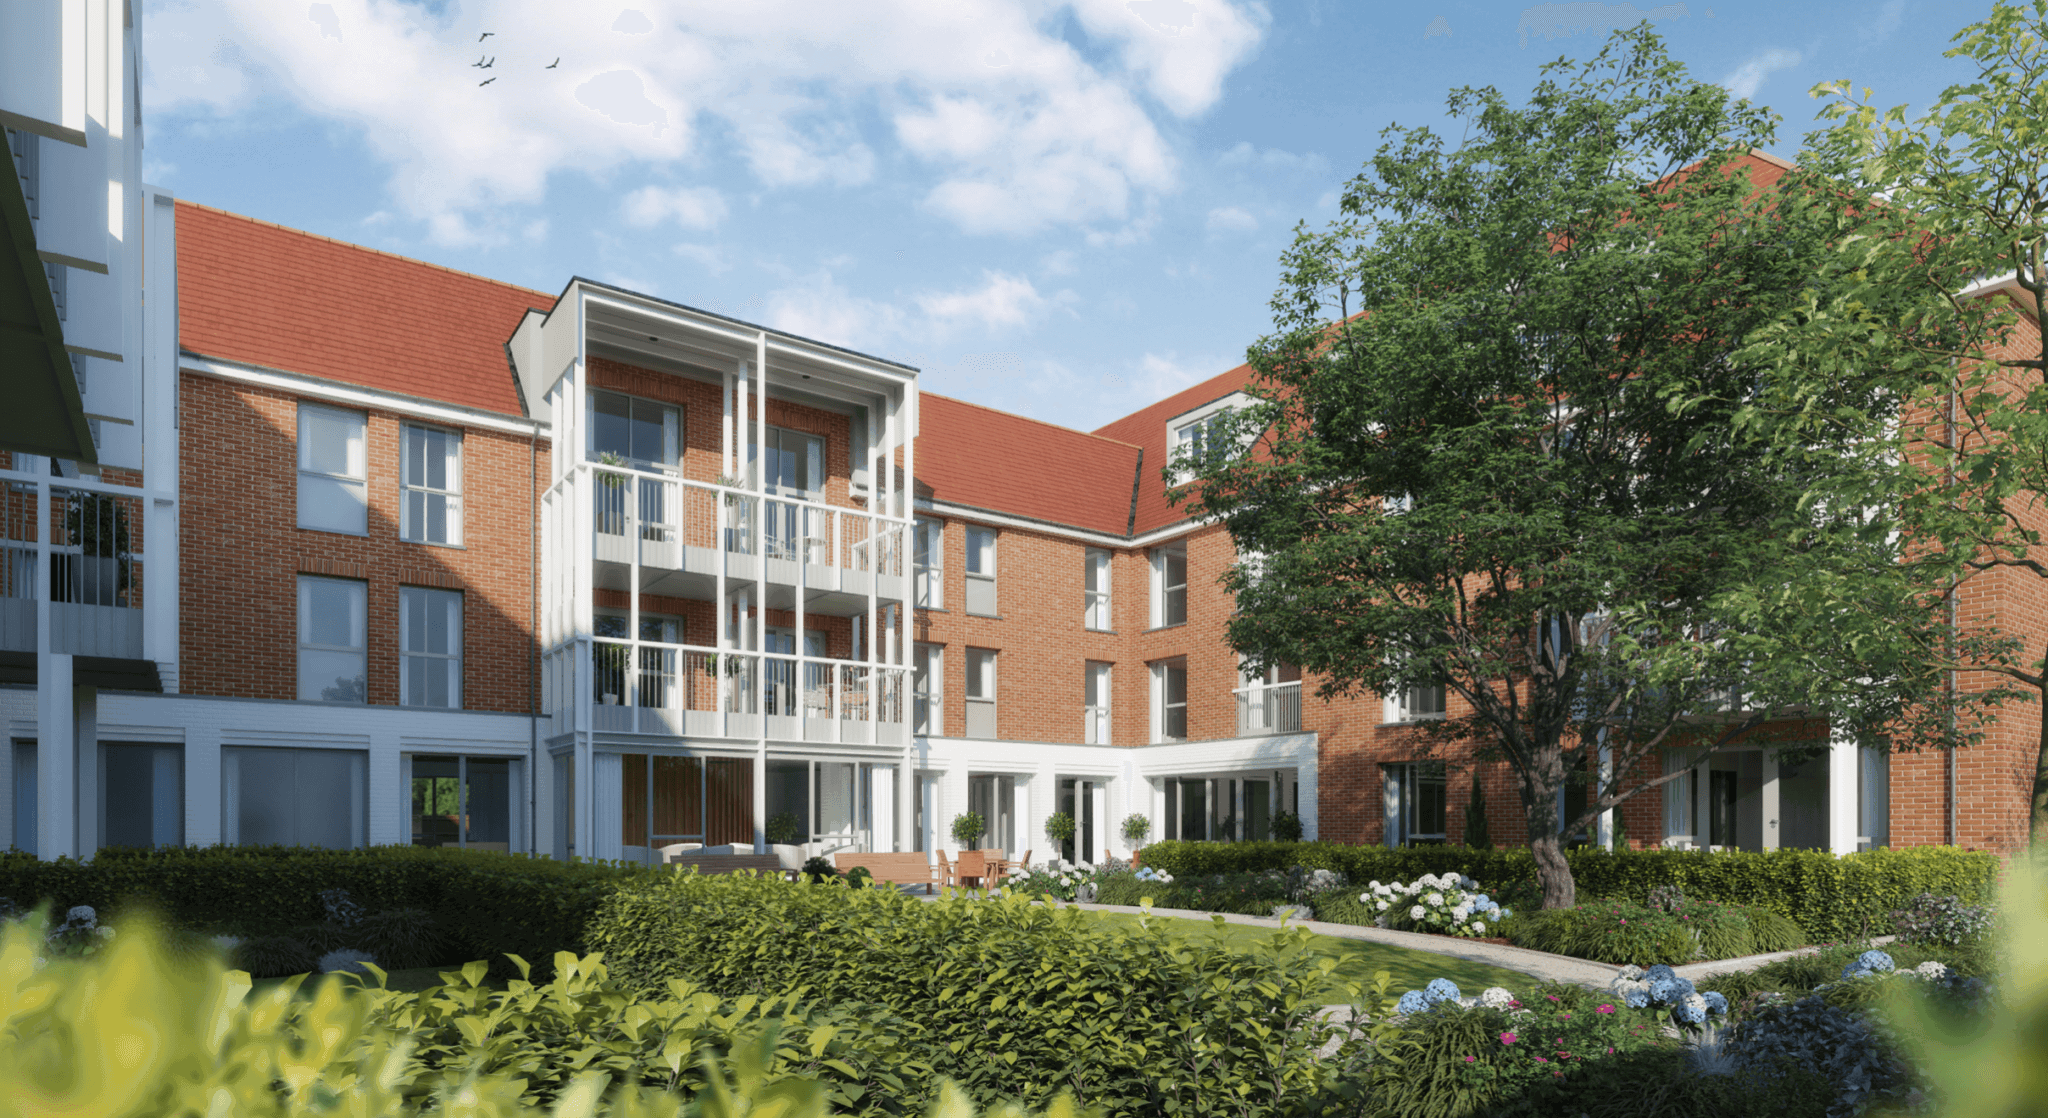 Gringer Hill, Maidenhead secures full planning permission